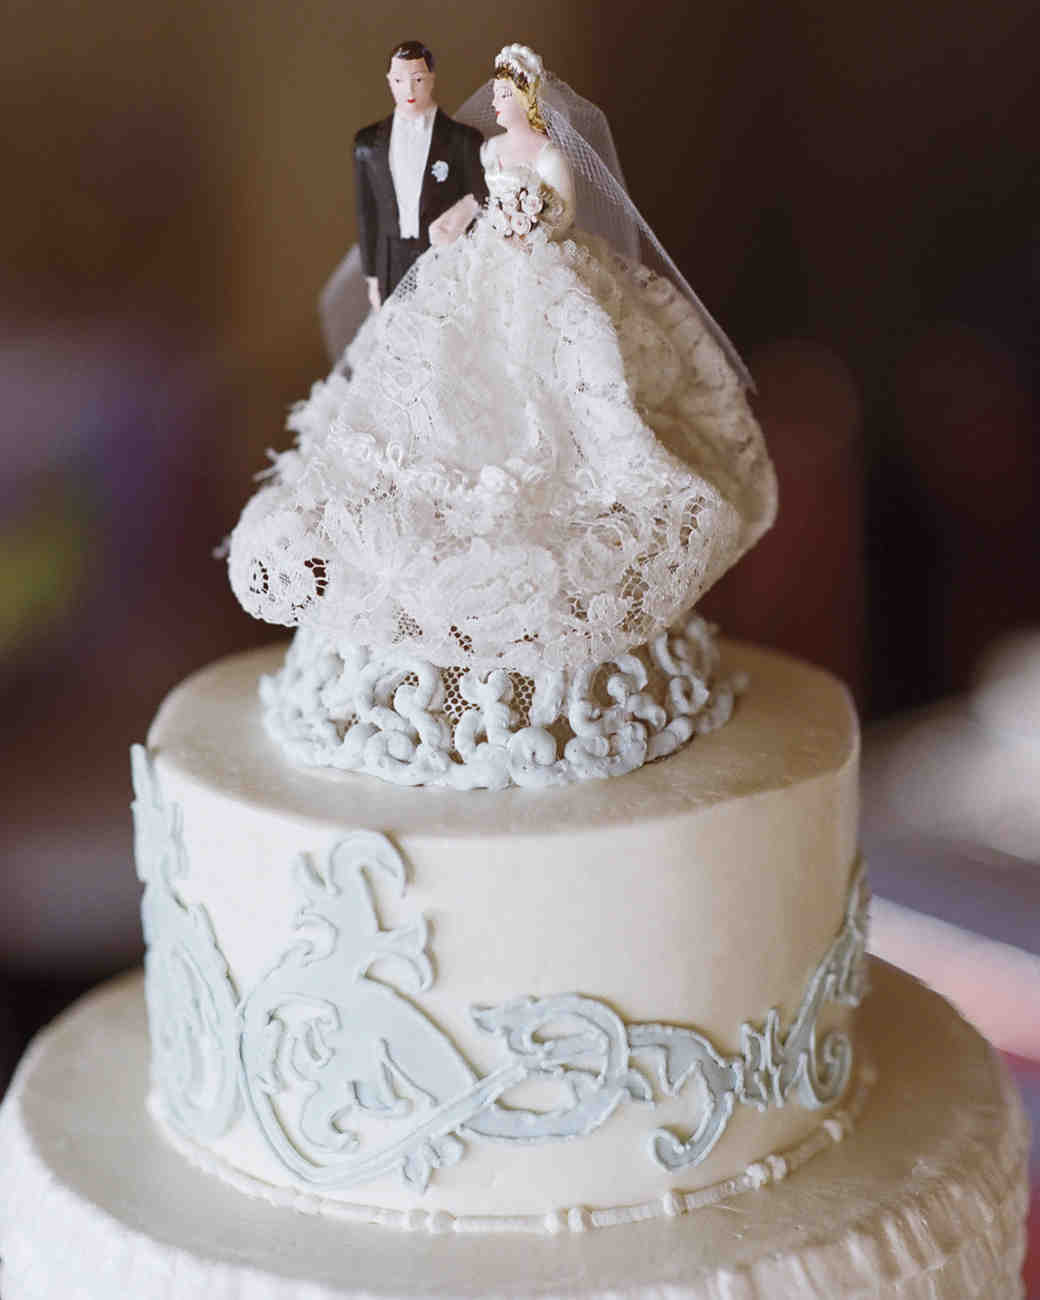 Best Wedding Cake Toppers
 36 of the Best Wedding Cake Toppers